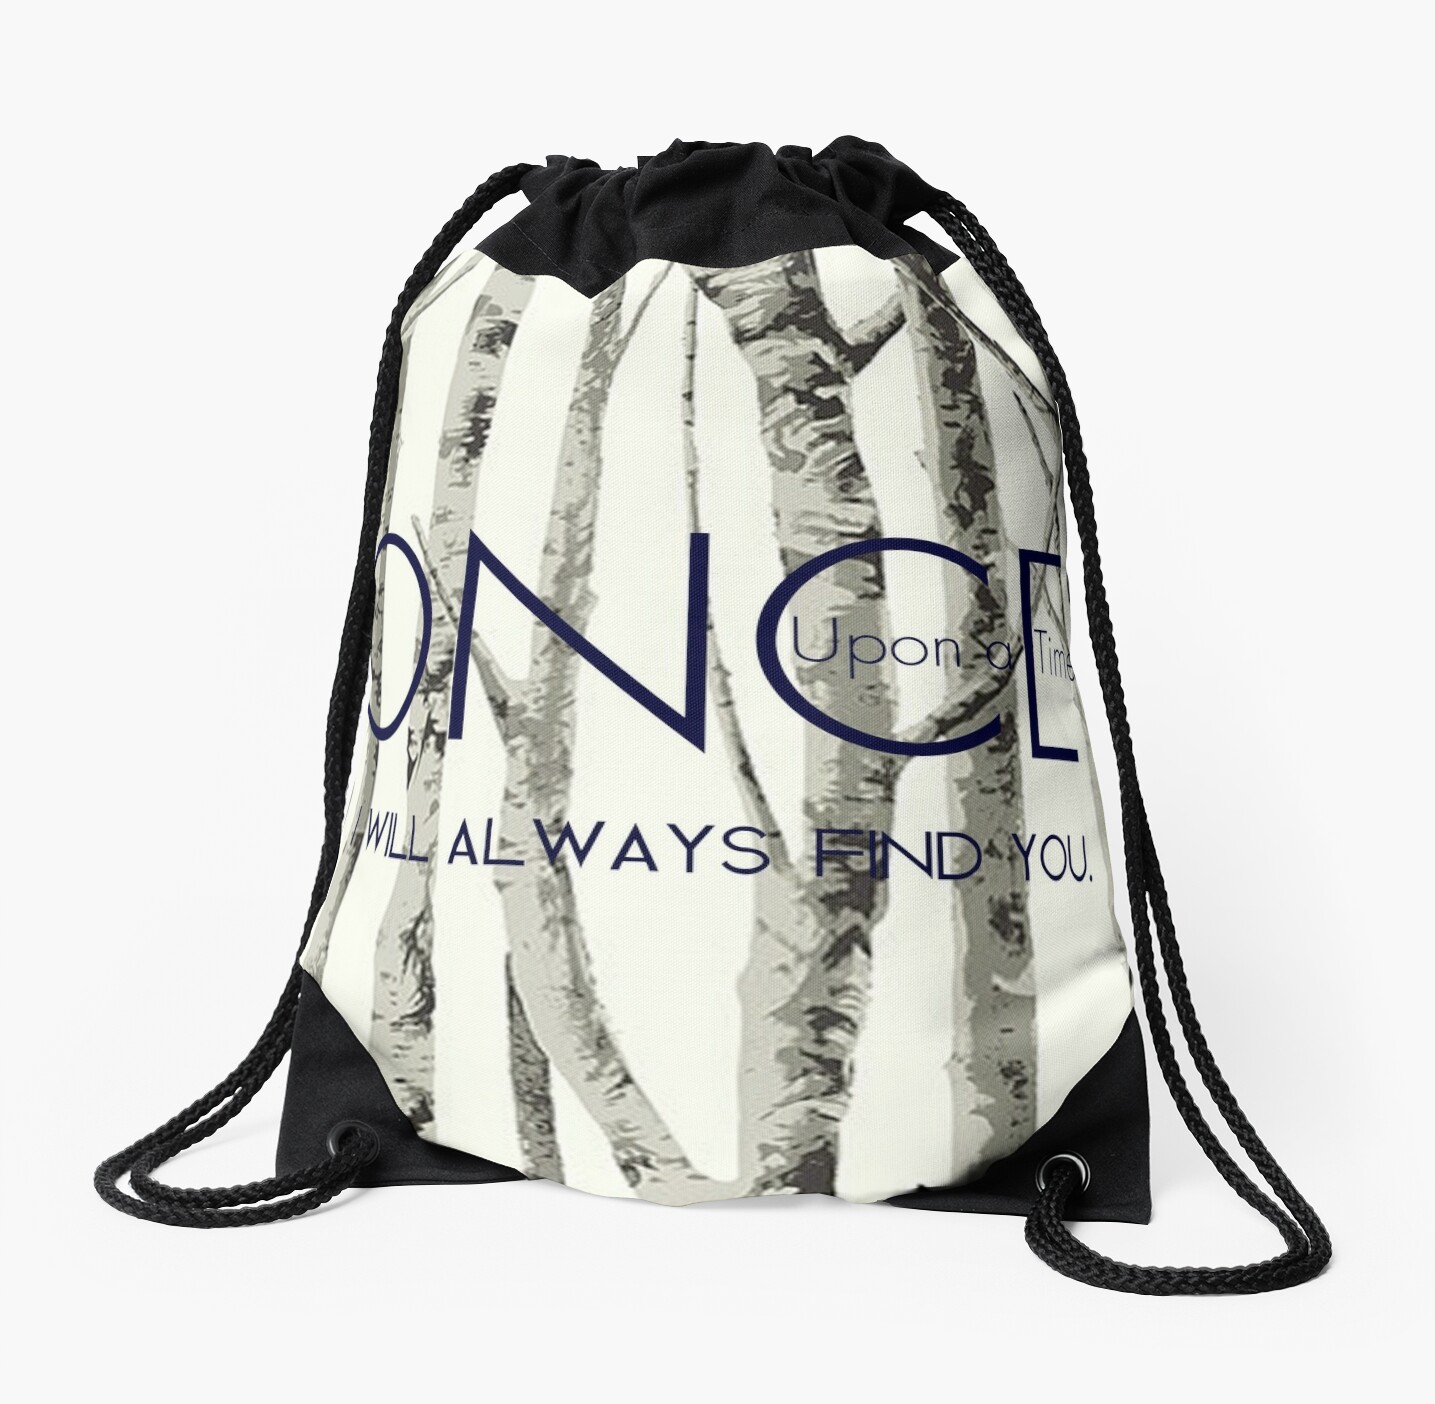 "Once Upon a Time (OUAT) - "I Will Always Find You."" Drawstring Bags